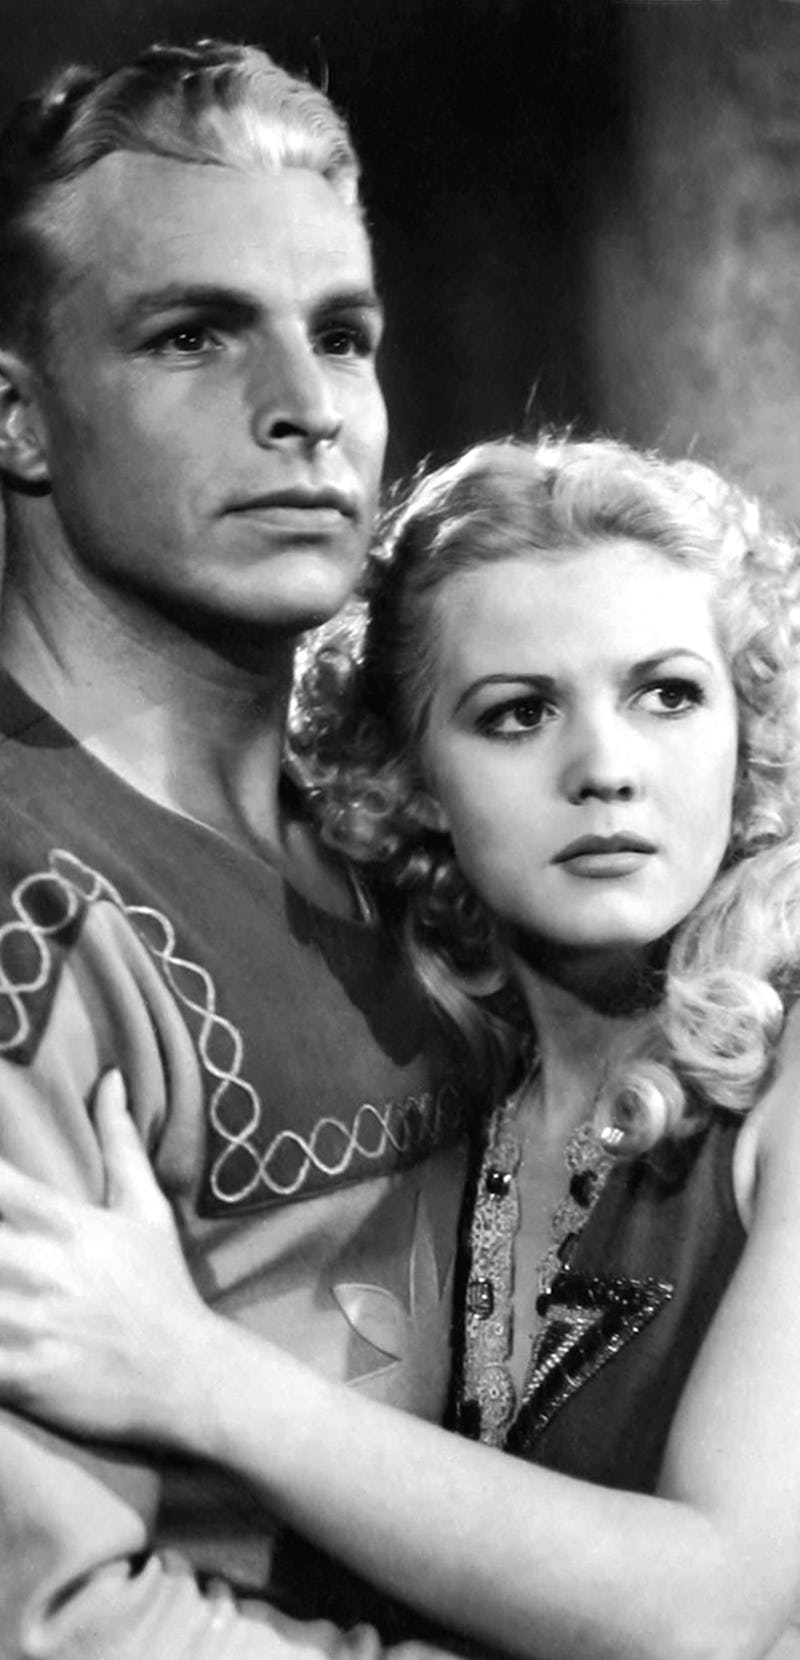 Actors Buster Crabbe as Flash Gordon and Jean Rogers as Dale Arden in the 1936 film serial 'Flash Go...